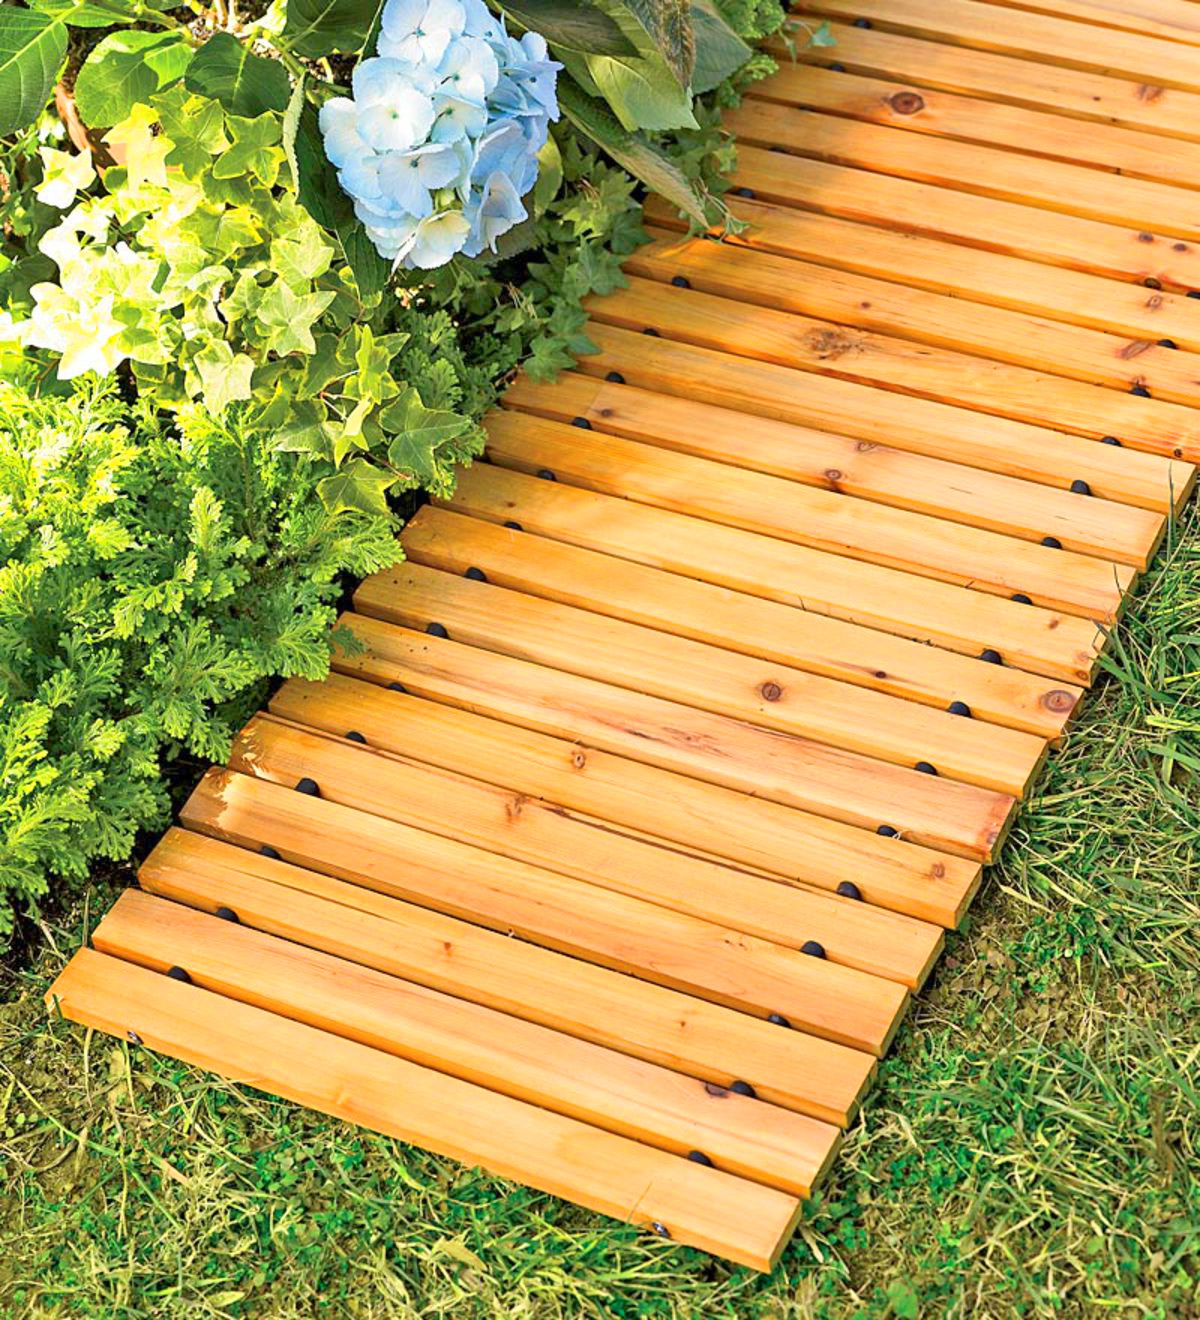 Roll-Out Wooden Walkway - Portable Roll-Out Straight Hardwood Pathway